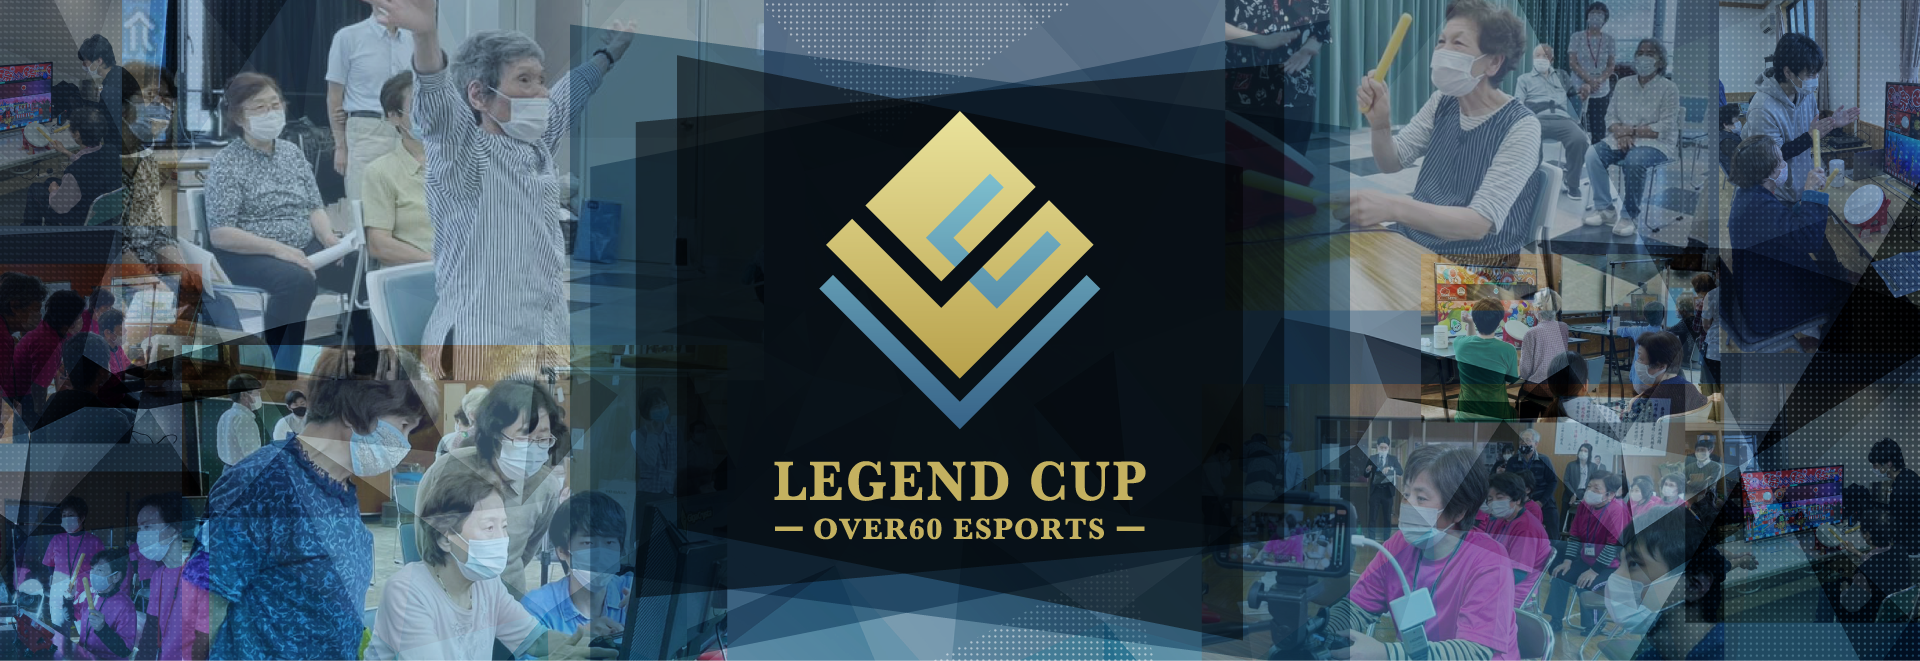 LEGEND_CUP-OVER60 ESPORTS-